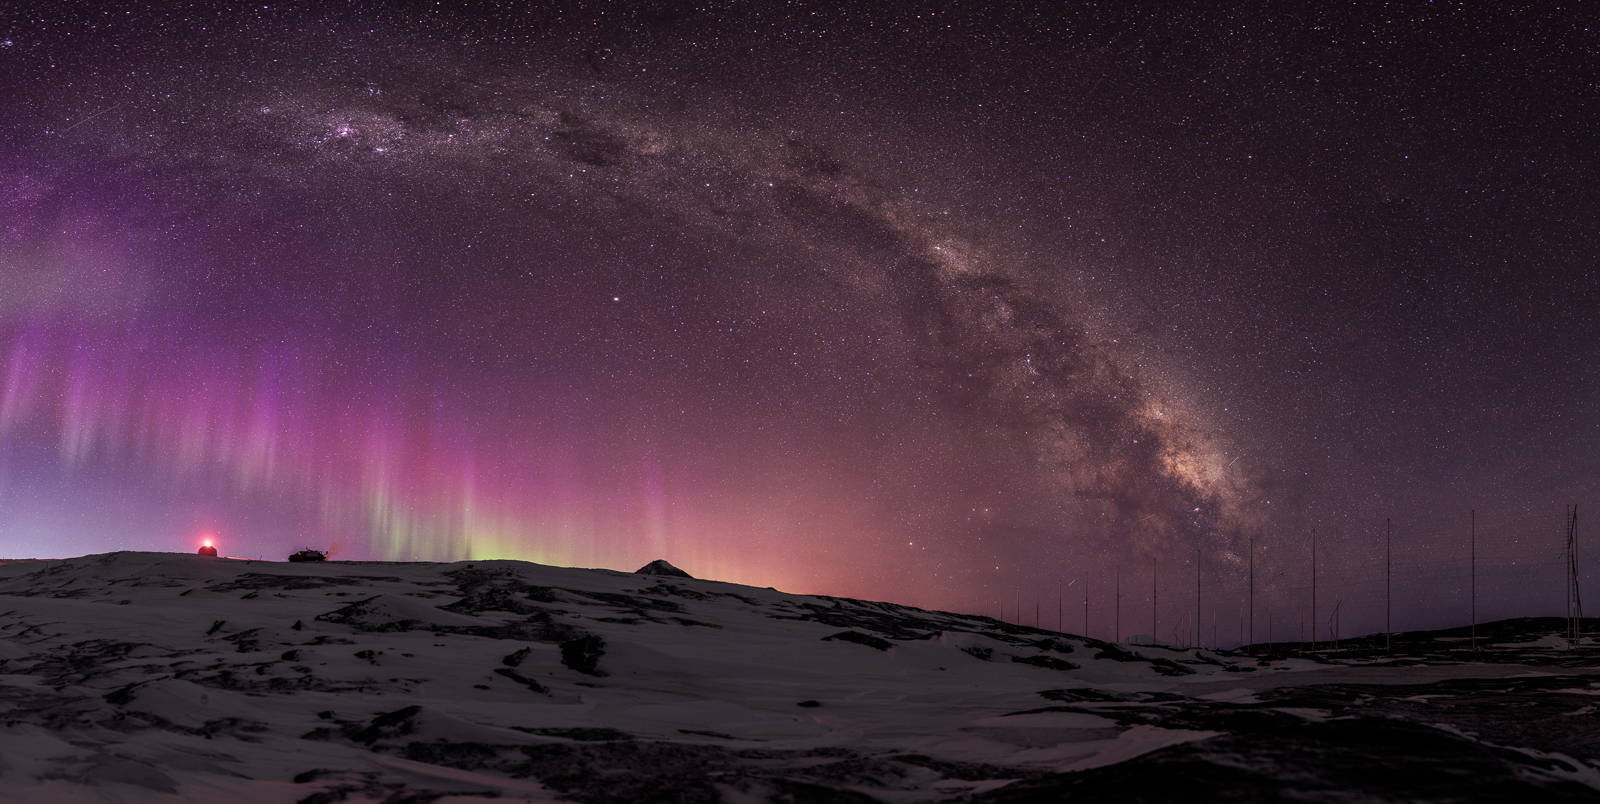 Auroras and the Milky Way over antennas.